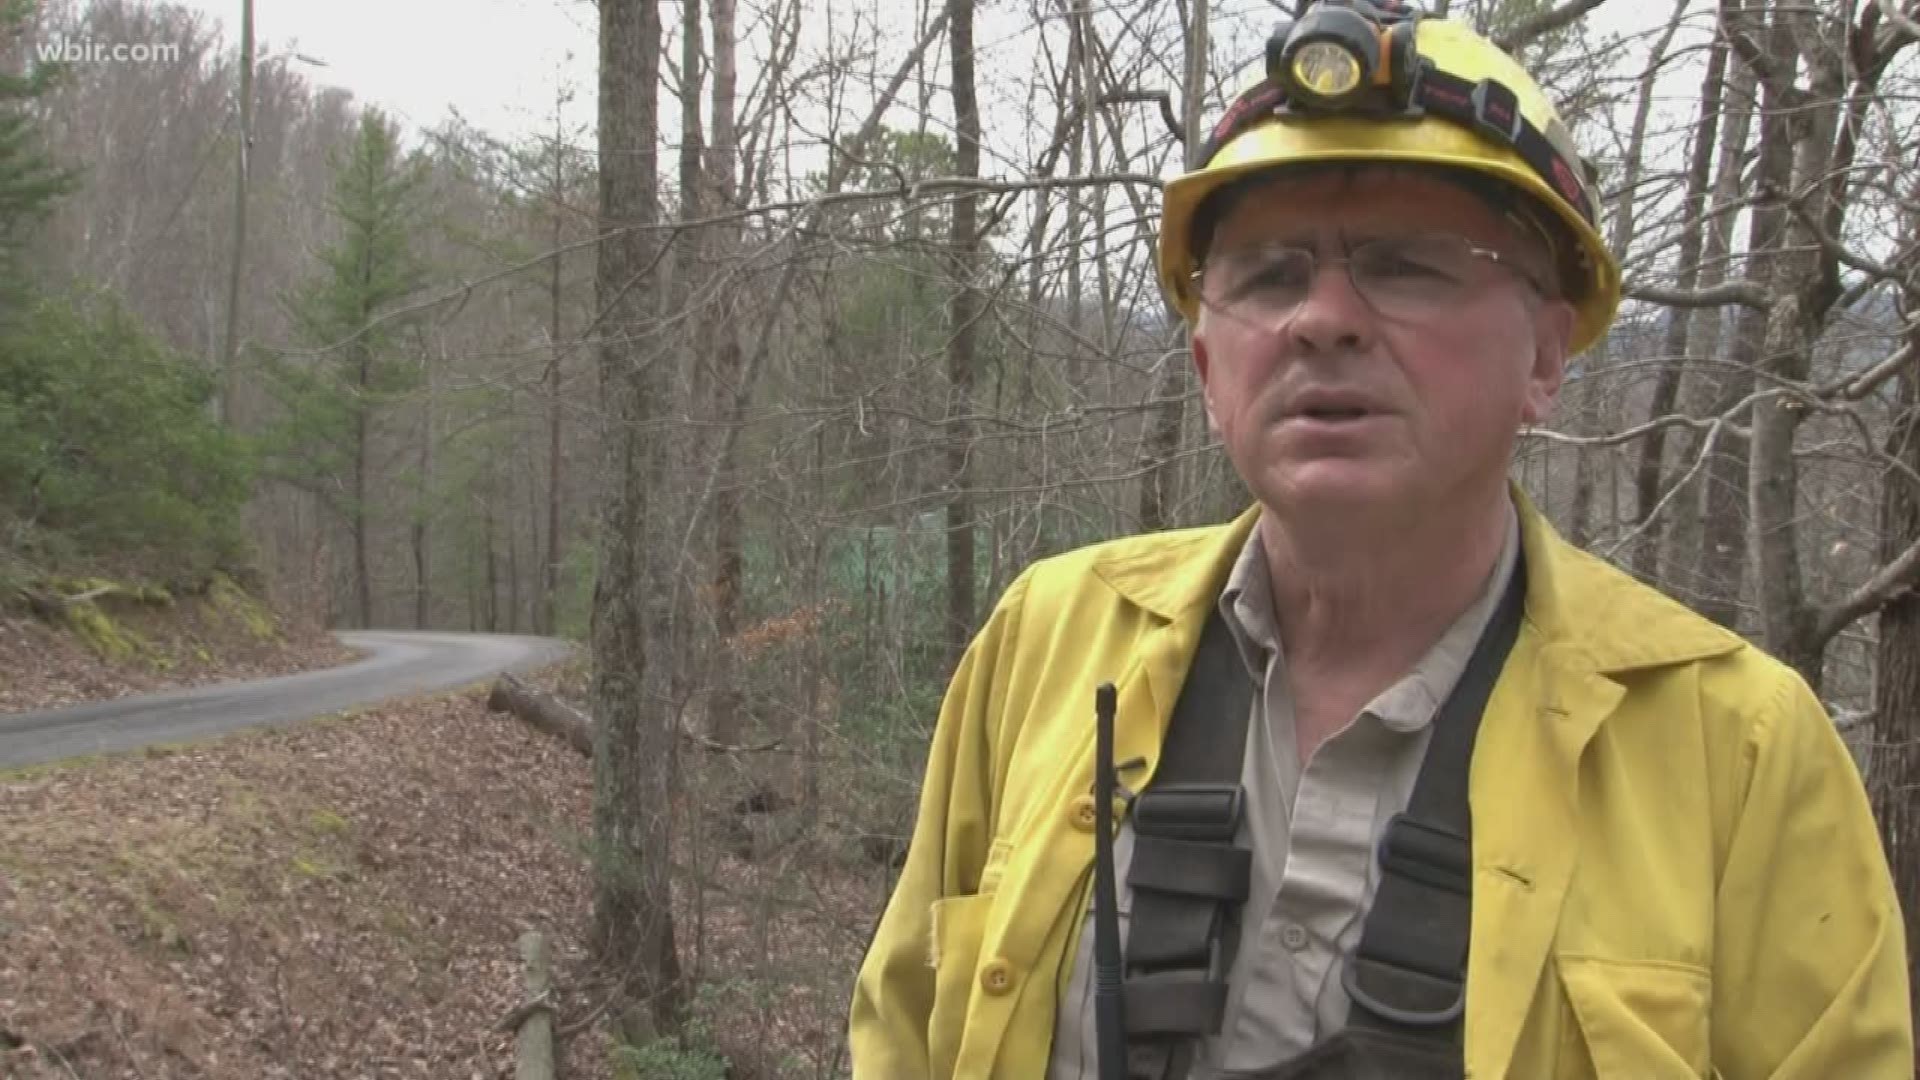 Every forest fire is different, but East Tennessee firefighters learned crucial strategies from the 2016 Gatlinburg wildfires.